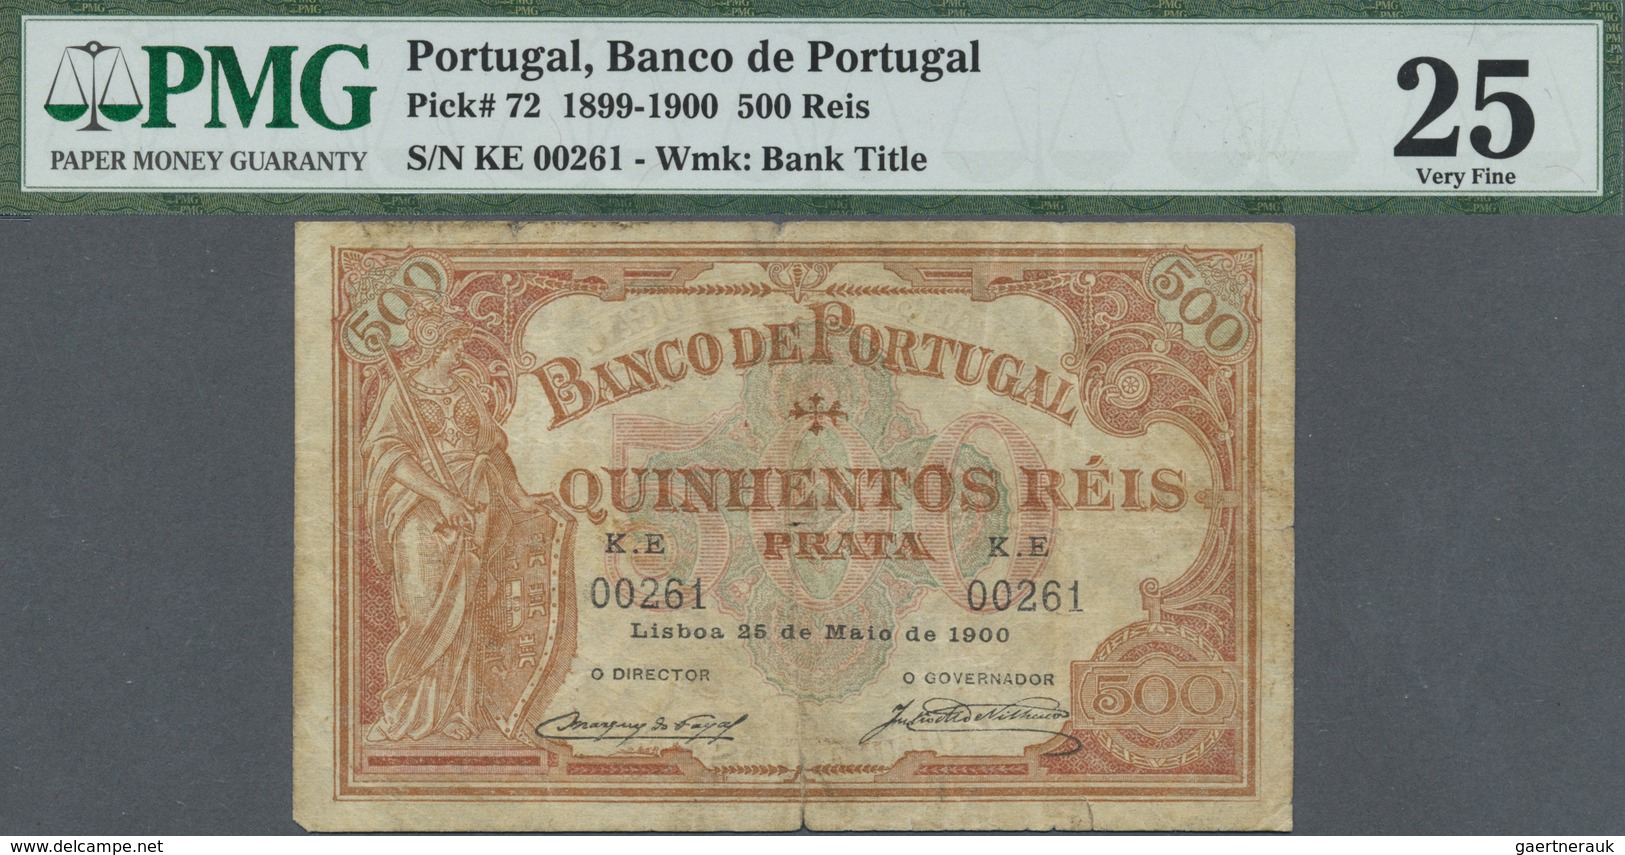 Portugal: Banco De Portugal 500 Reis 1900, P.72, Stained Paper With Several Folds, Tiny Hole At Cent - Portogallo